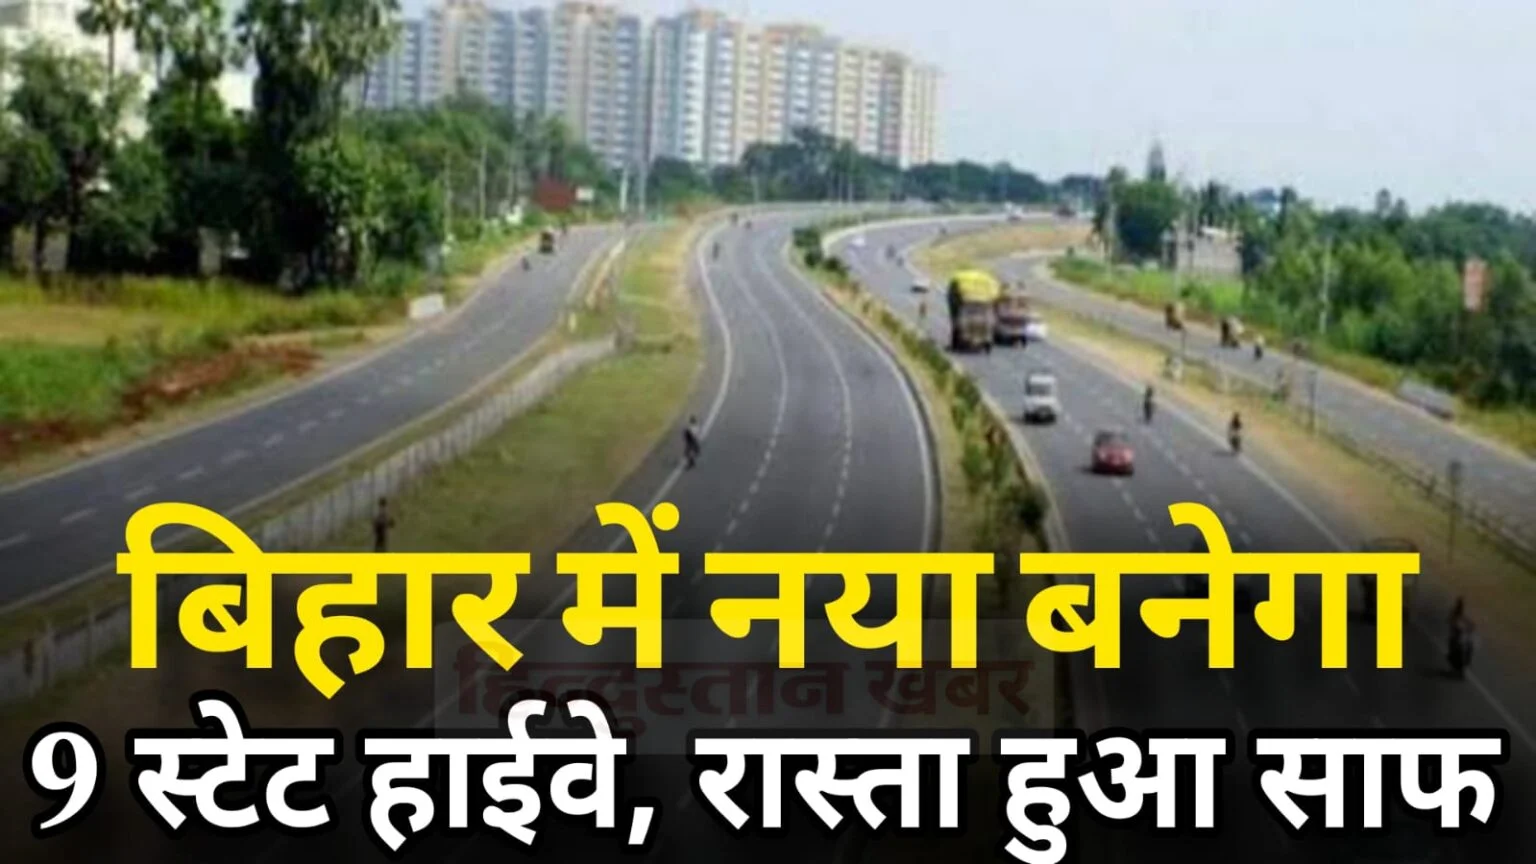 Bihar New State Highway,Bihar new state highway route map,Bihar new state highway route map pdf,Bihar state highway list,Bihar new state highway map,Bihar new state highway map pdf,Bihar new state highway latest news,four-lane road project in bihar,Upcoming NHAI projects in Bihar,